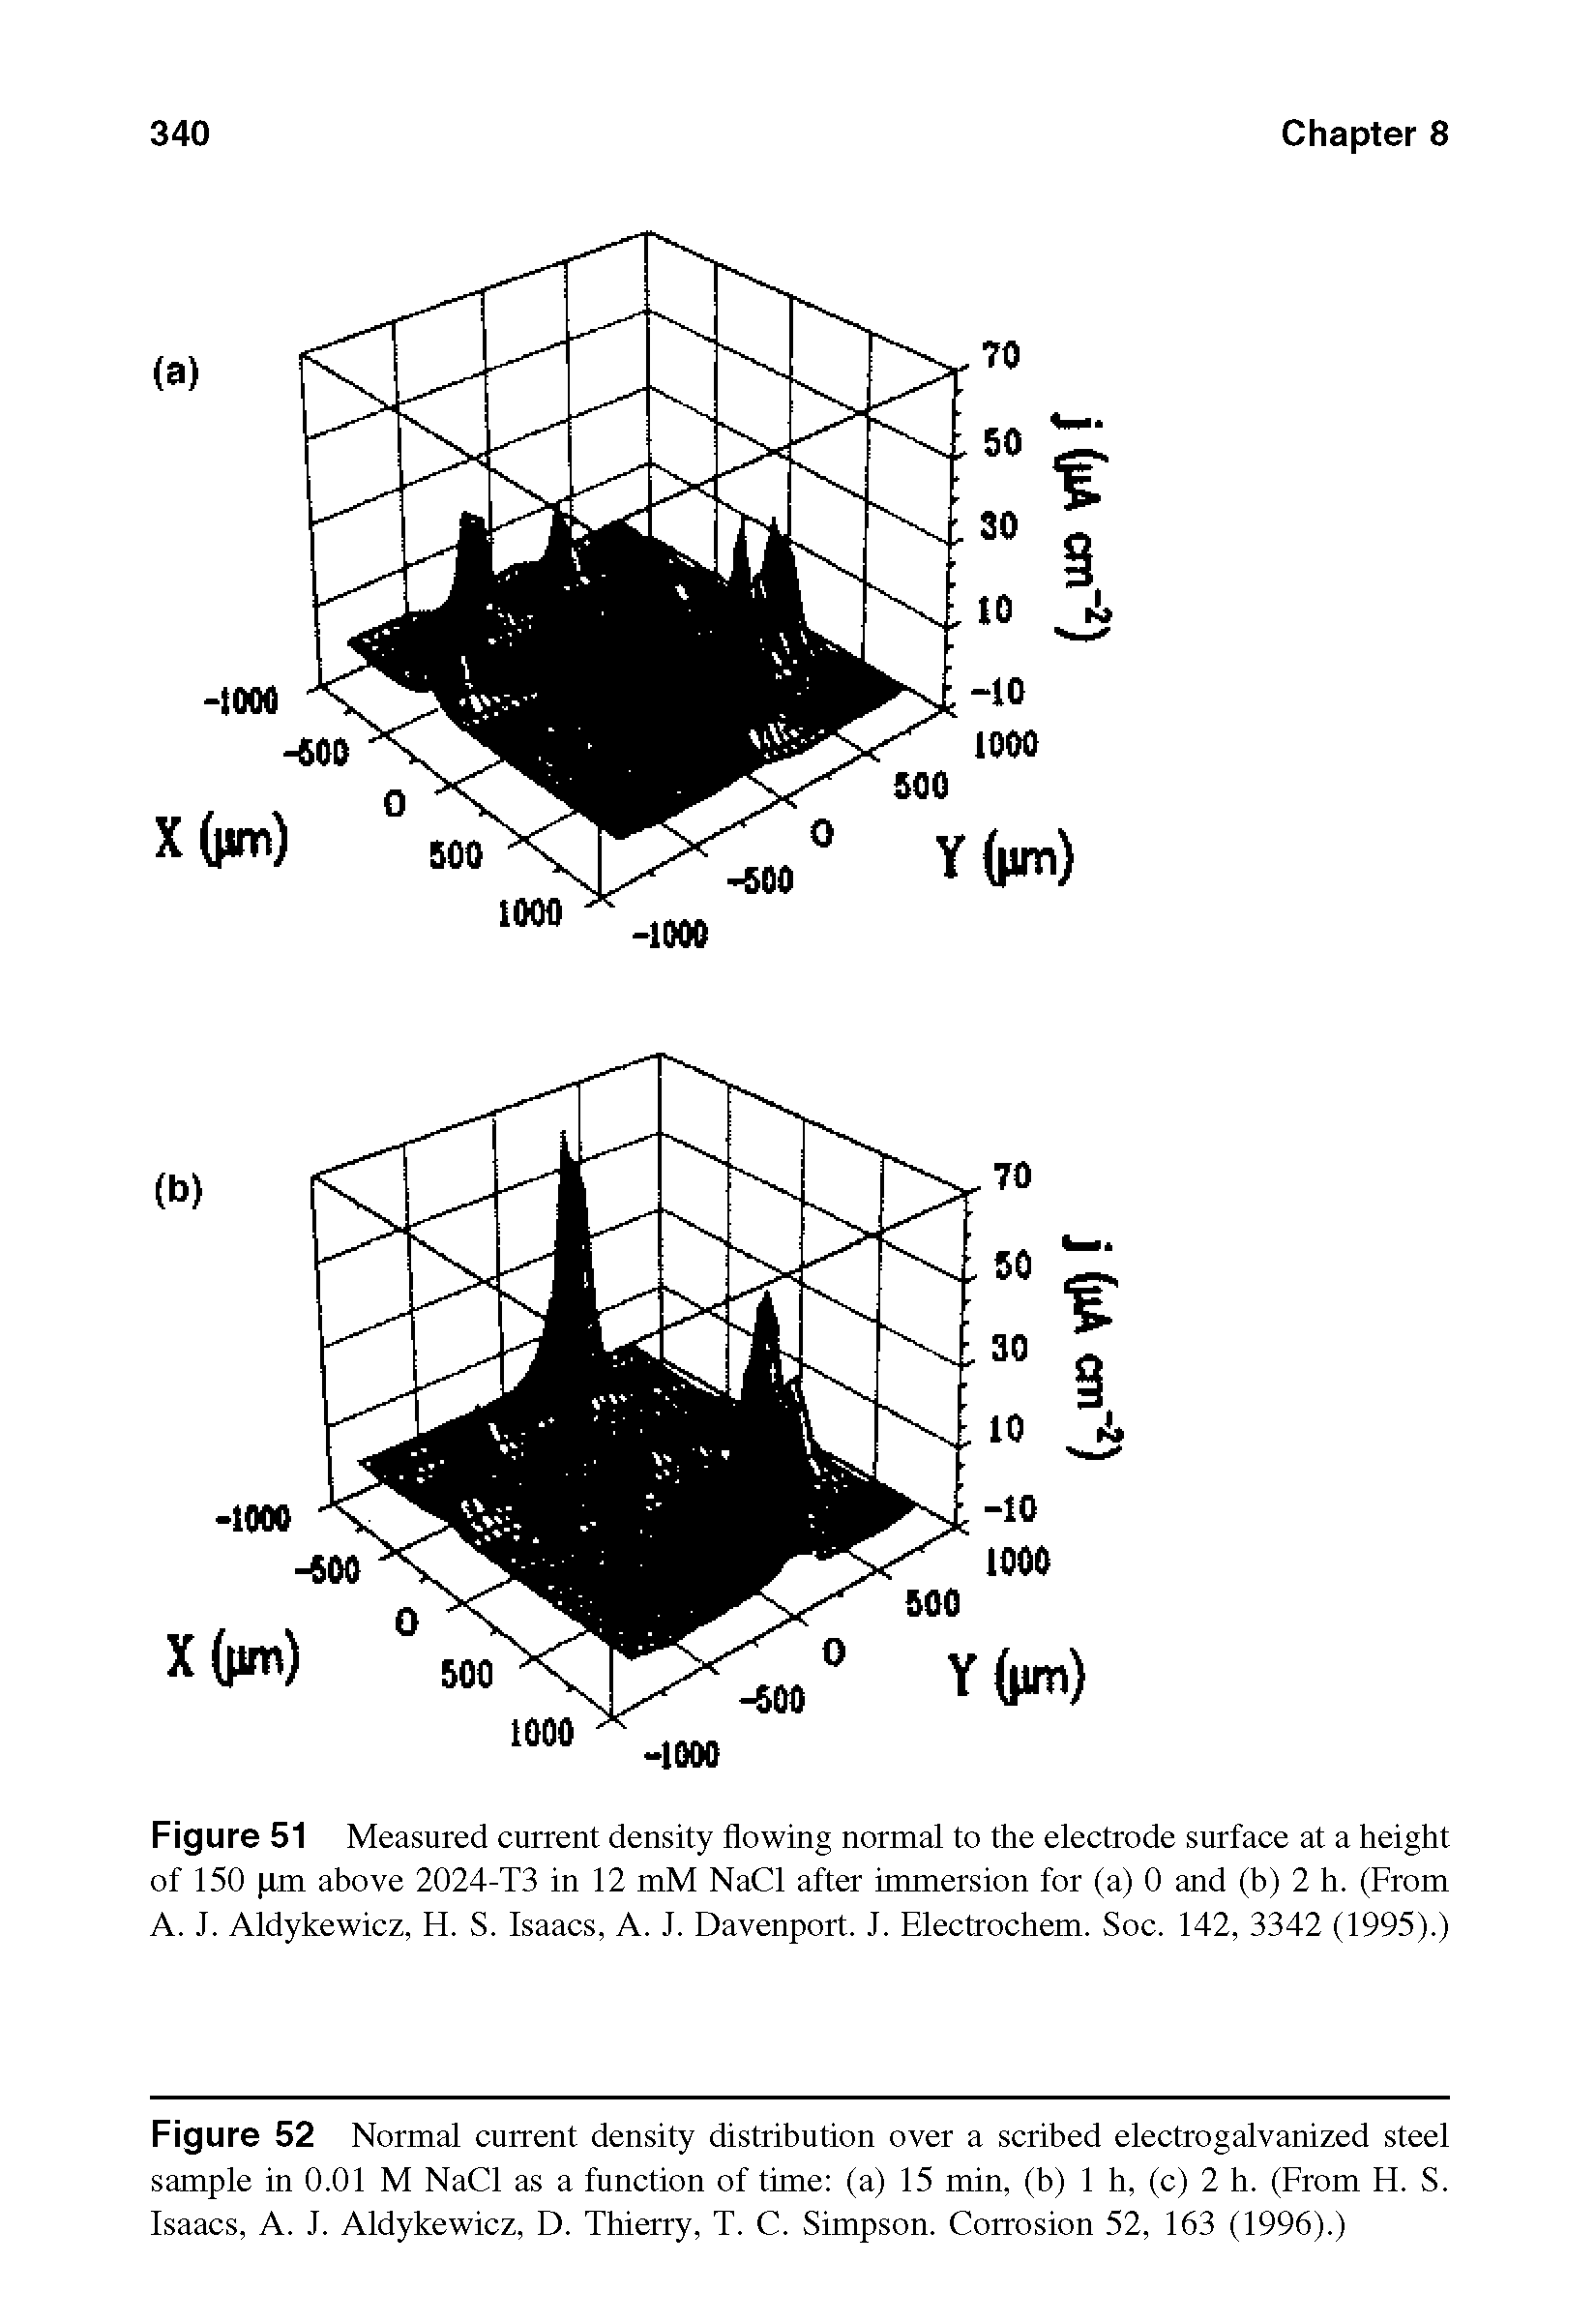 Figure 52 Normal current density distribution over a scribed electrogalvanized steel sample in 0.01 M NaCl as a function of time (a) 15 min, (b) 1 h, (c) 2 h. (From H. S. Isaacs, A. J. Aldykewicz, D. Thierry, T. C. Simpson. Corrosion 52, 163 (1996).)...